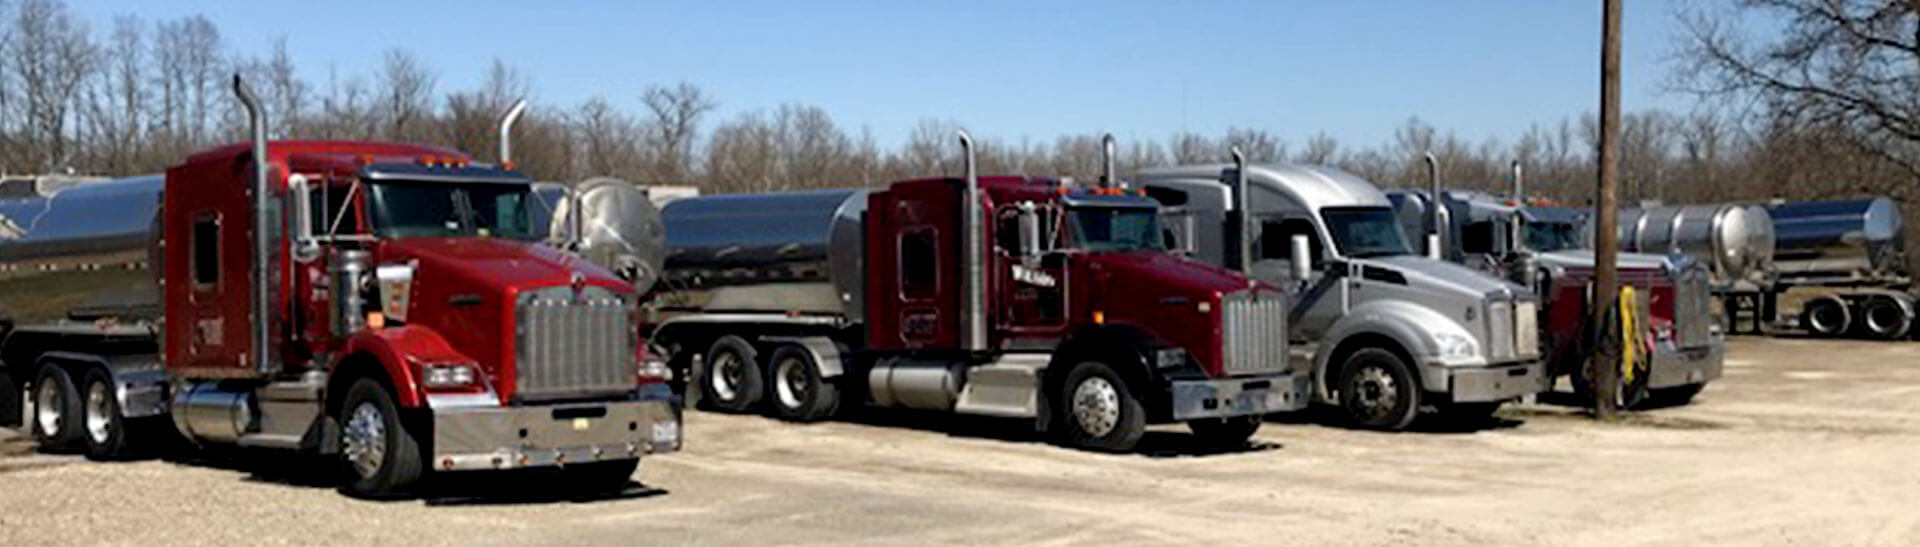 Columbus Trucking Company and Trucking Services